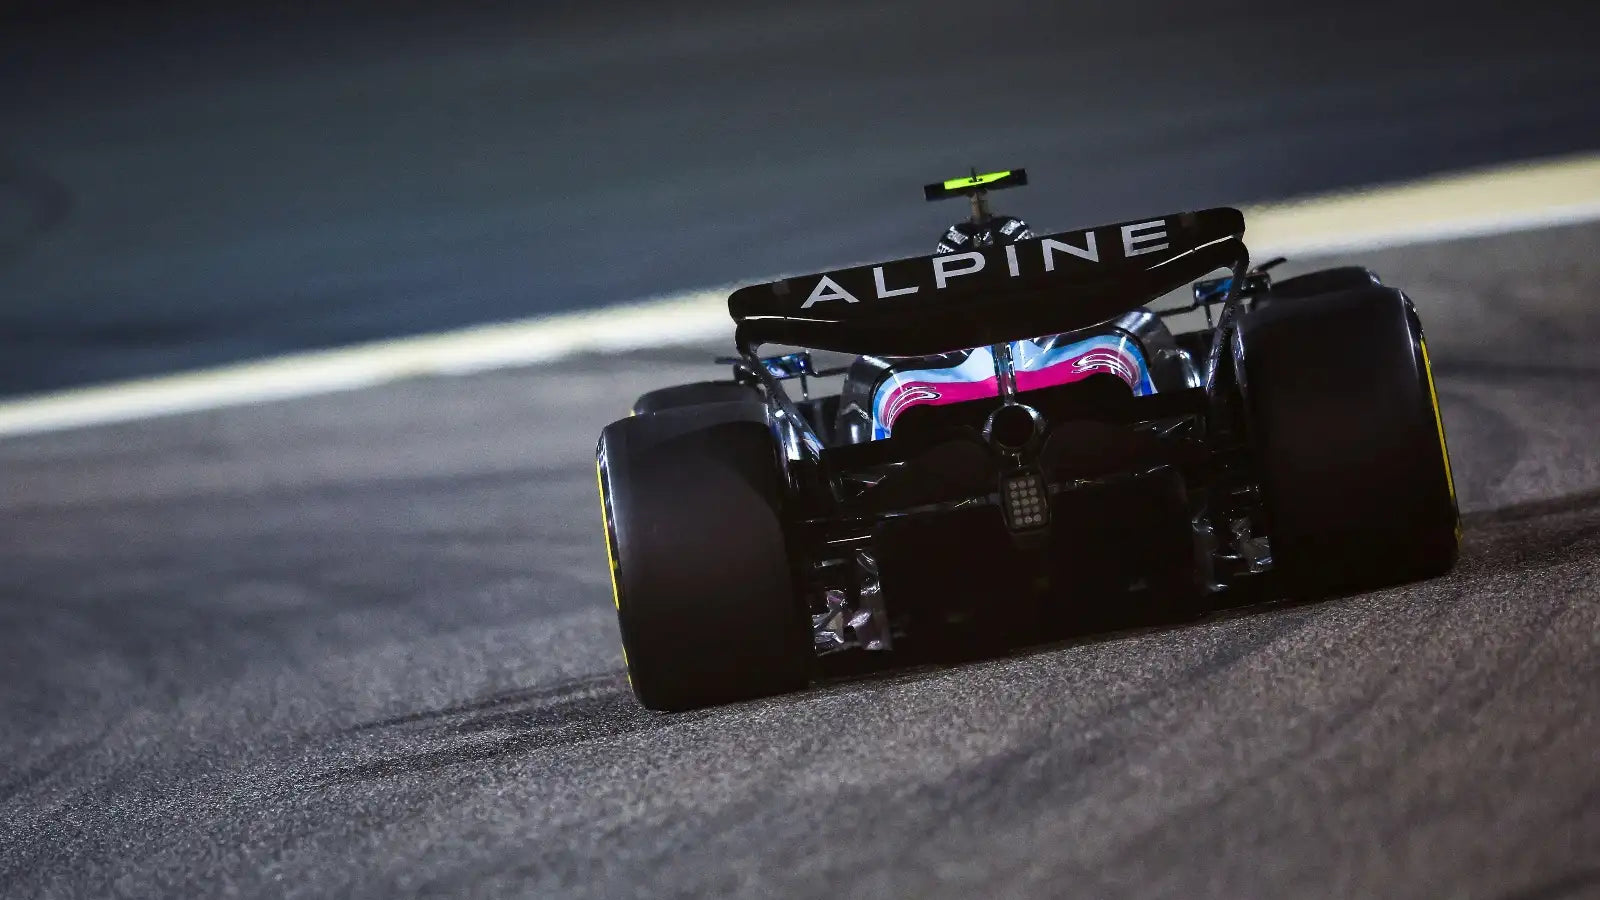 Alpine drivers paint bleak picture with tough start predicted for Bahrain GP